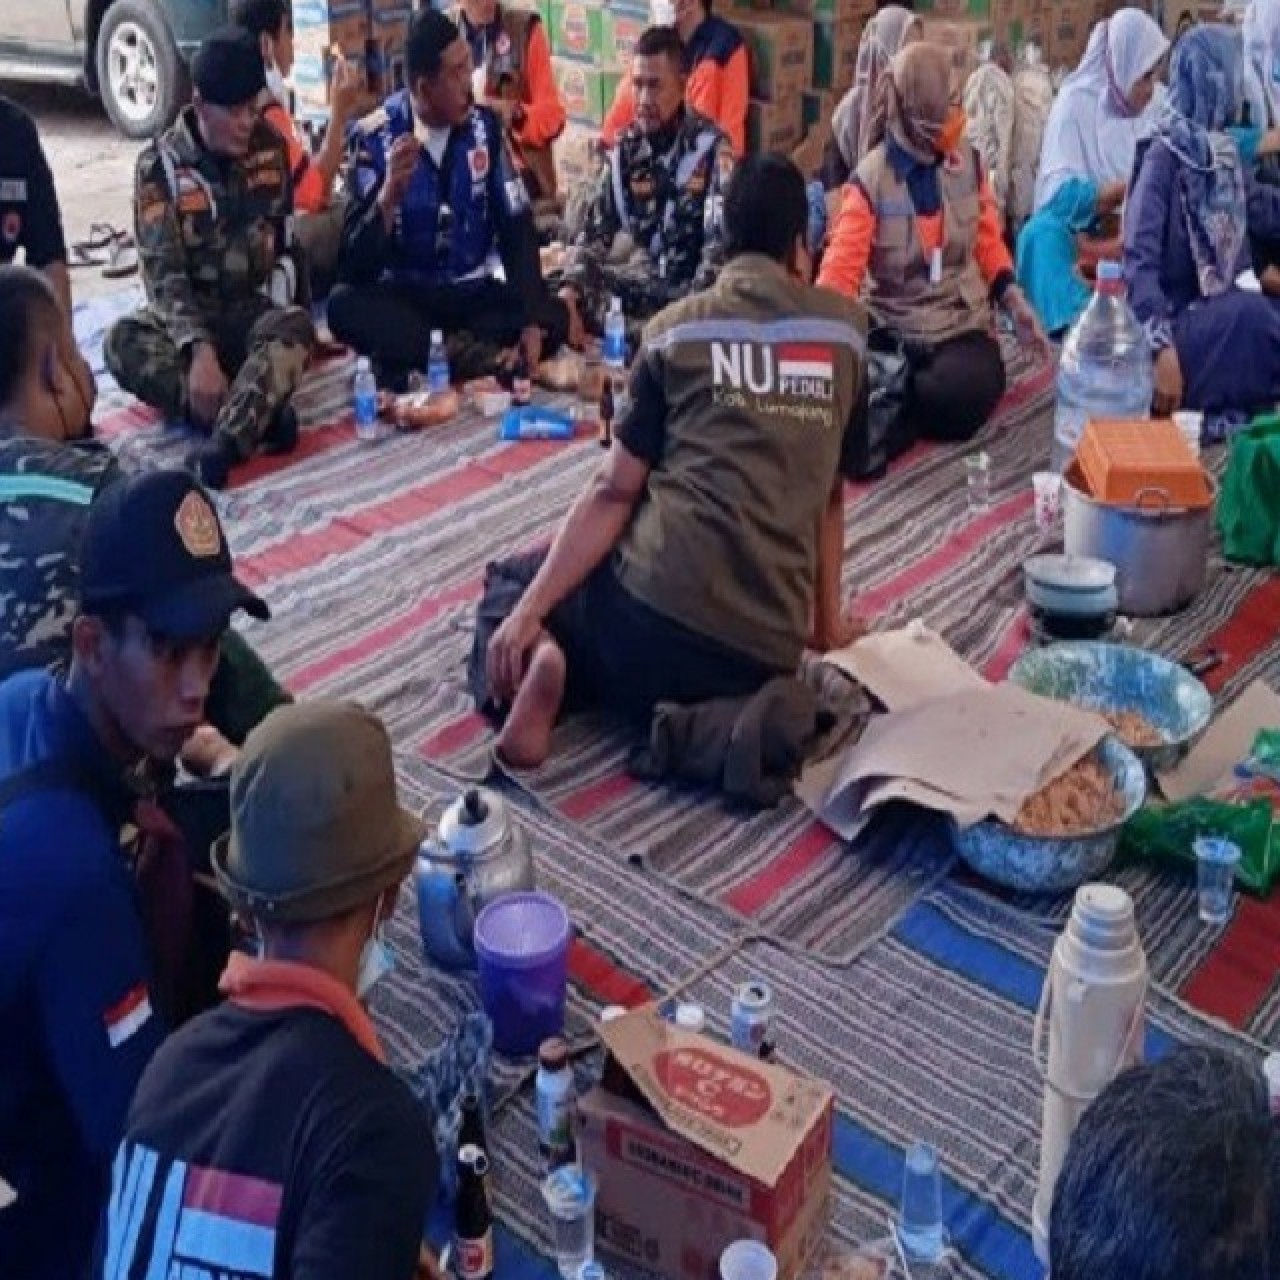 NU Cares Semeru distributes aid and provides psychosocial support to victims